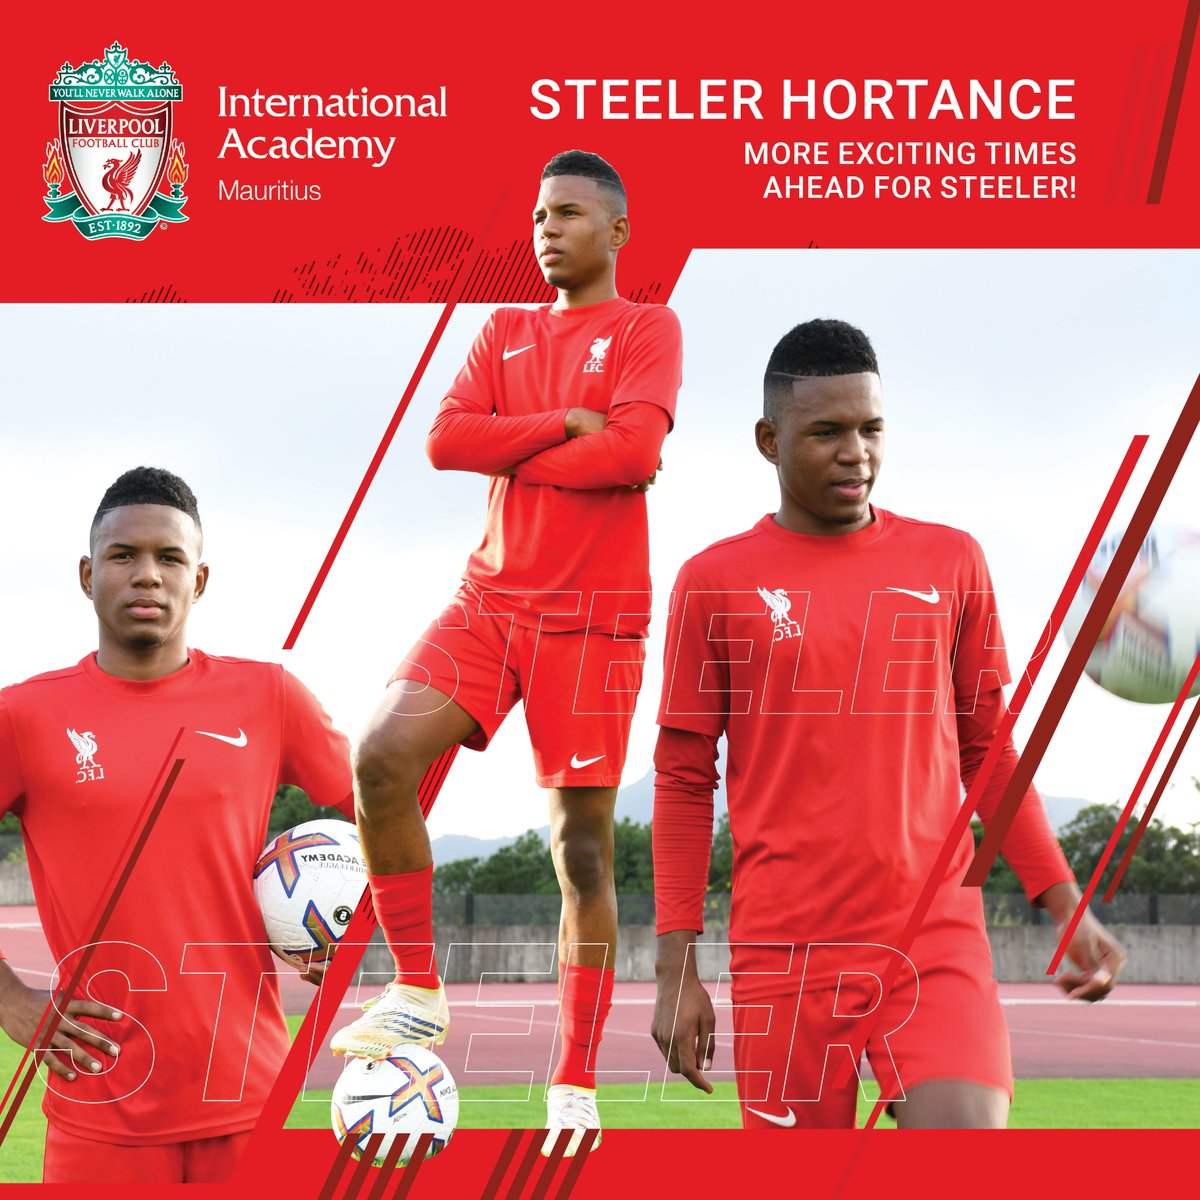 💥Breaking news💥 📢 LFCIA graduate 💪 Steeler Hortance has been invited  to 🇫🇷 France for a 4-day trial with SC Bastia! @LFC @SCBastia 
#LFCIA #Goforit #Mauritiusgottalent #CoteDorMauritius #Mauritius #Moris #sports #WalkOn #LFC #Football #Liverpool #TheRedWay #TheLiverpoolWay